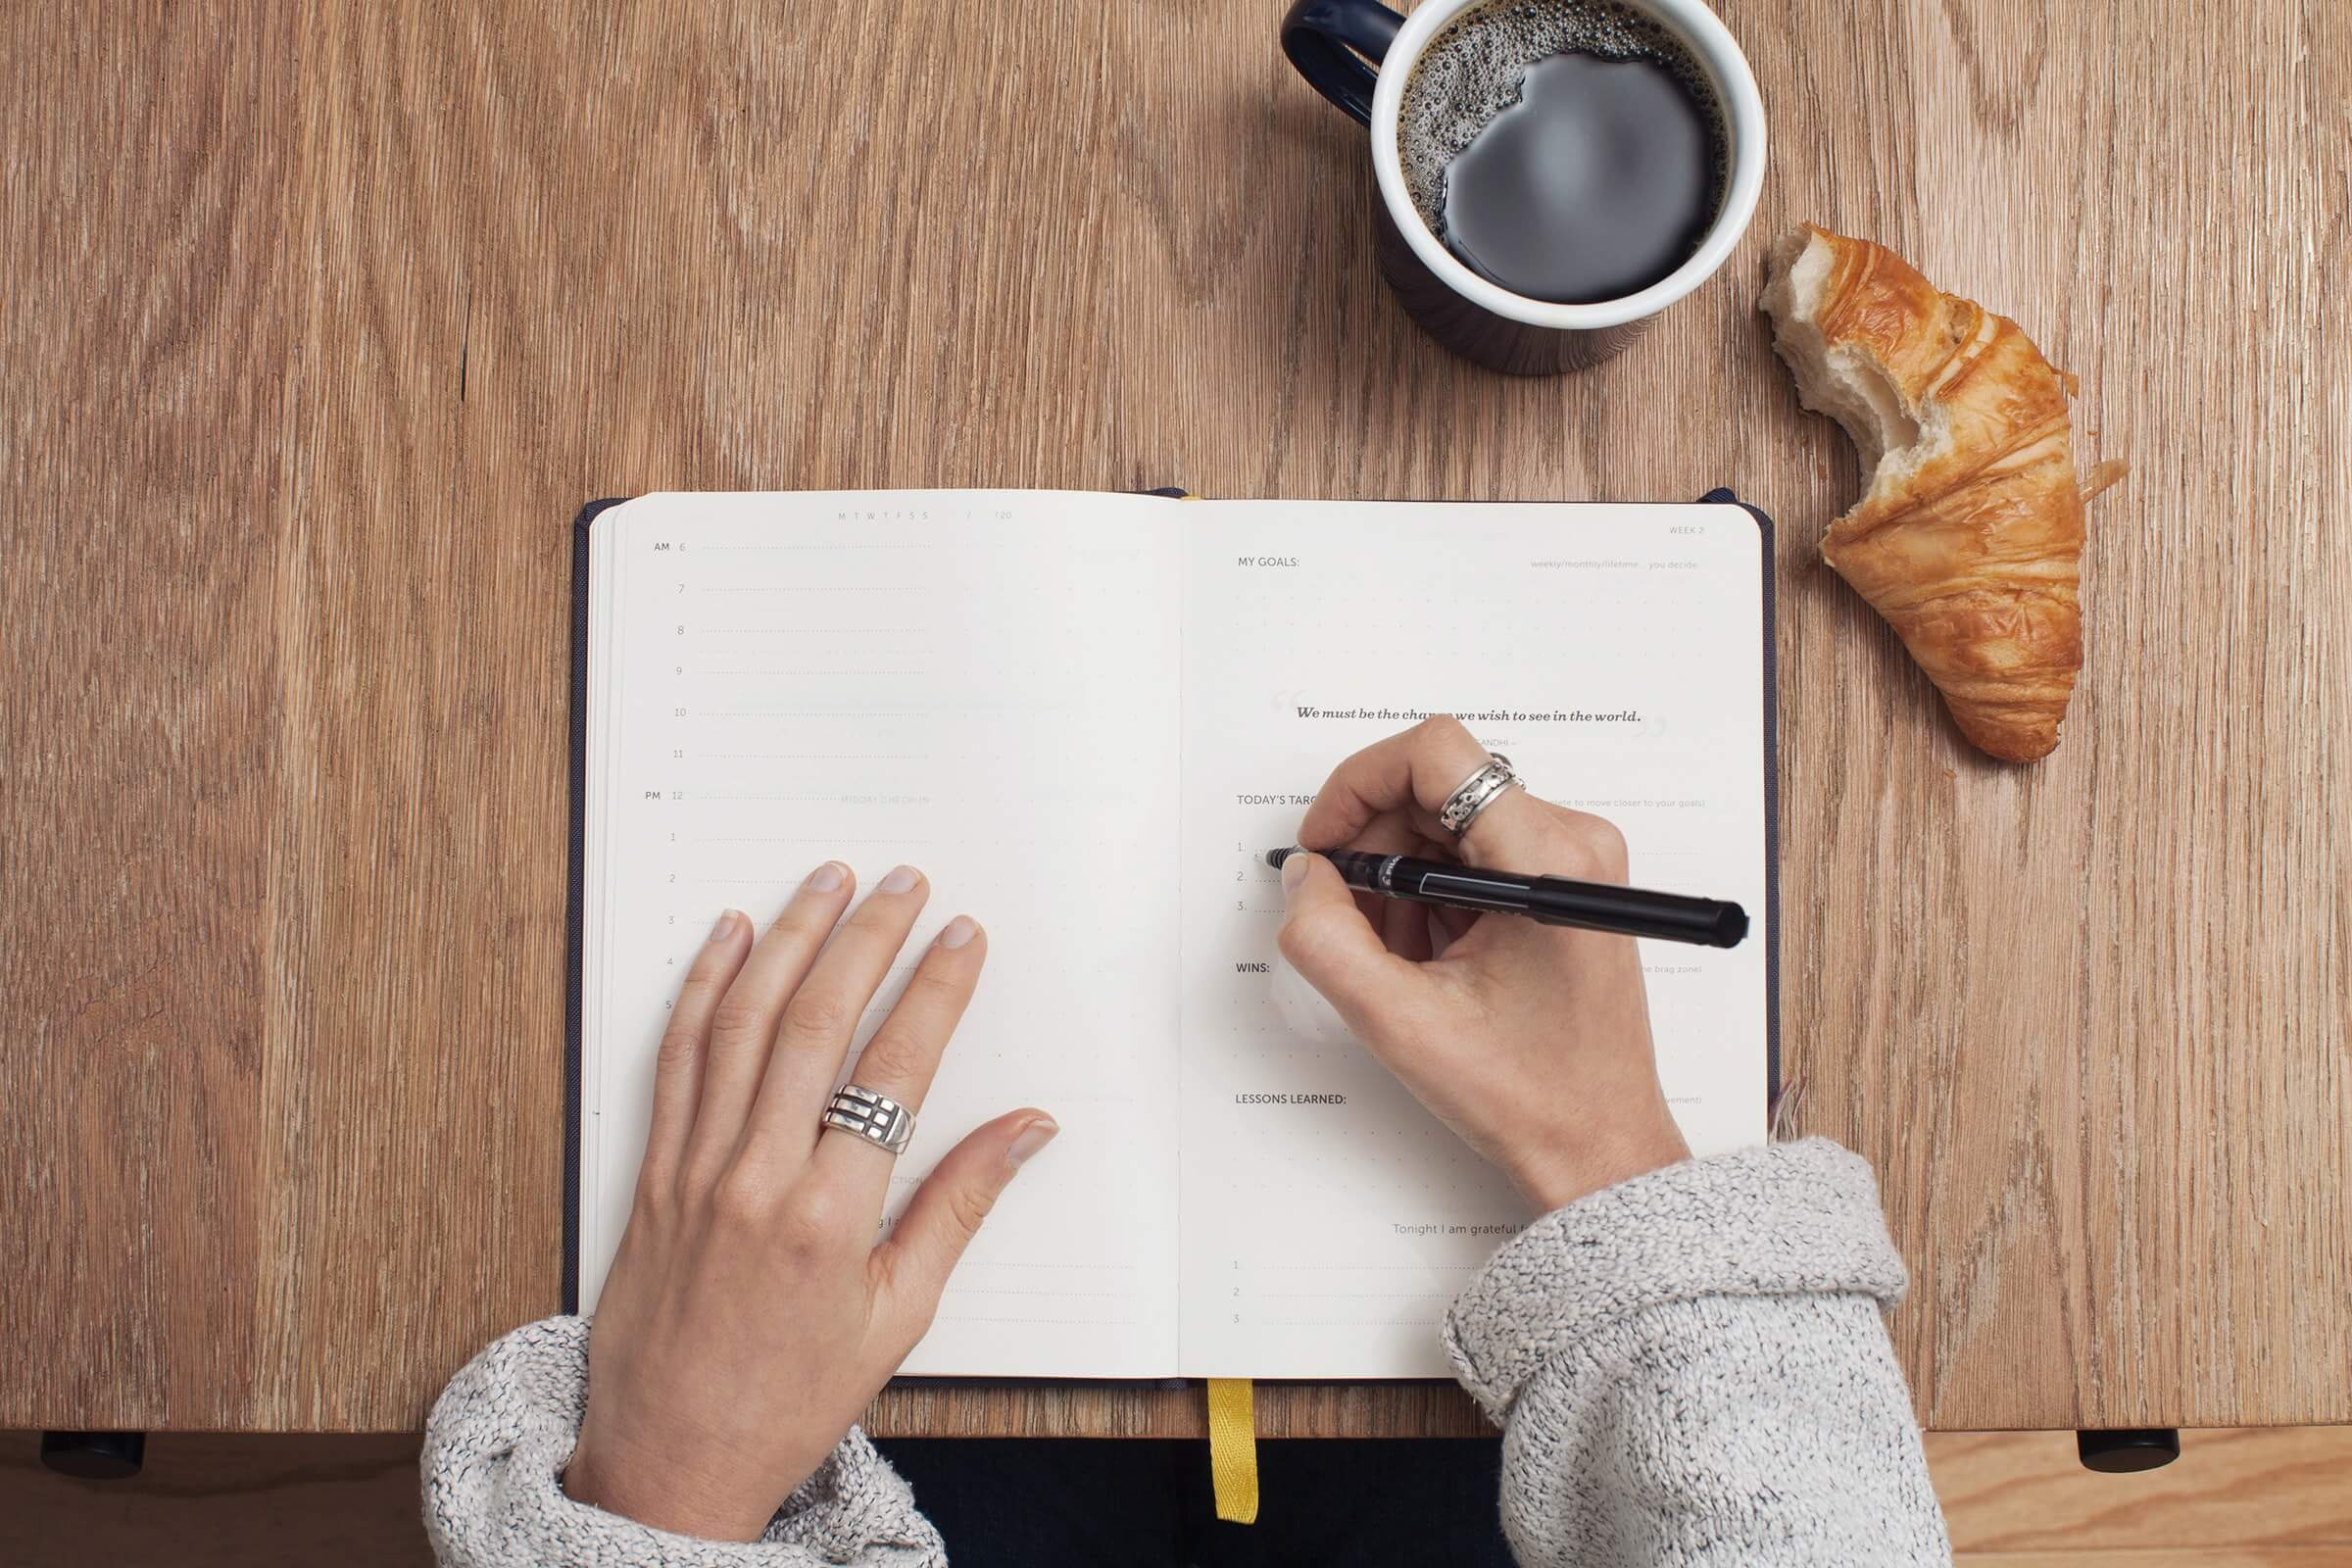 Overhead photo of woman writing in notepad with croissant and cup of coffee beside the notepad